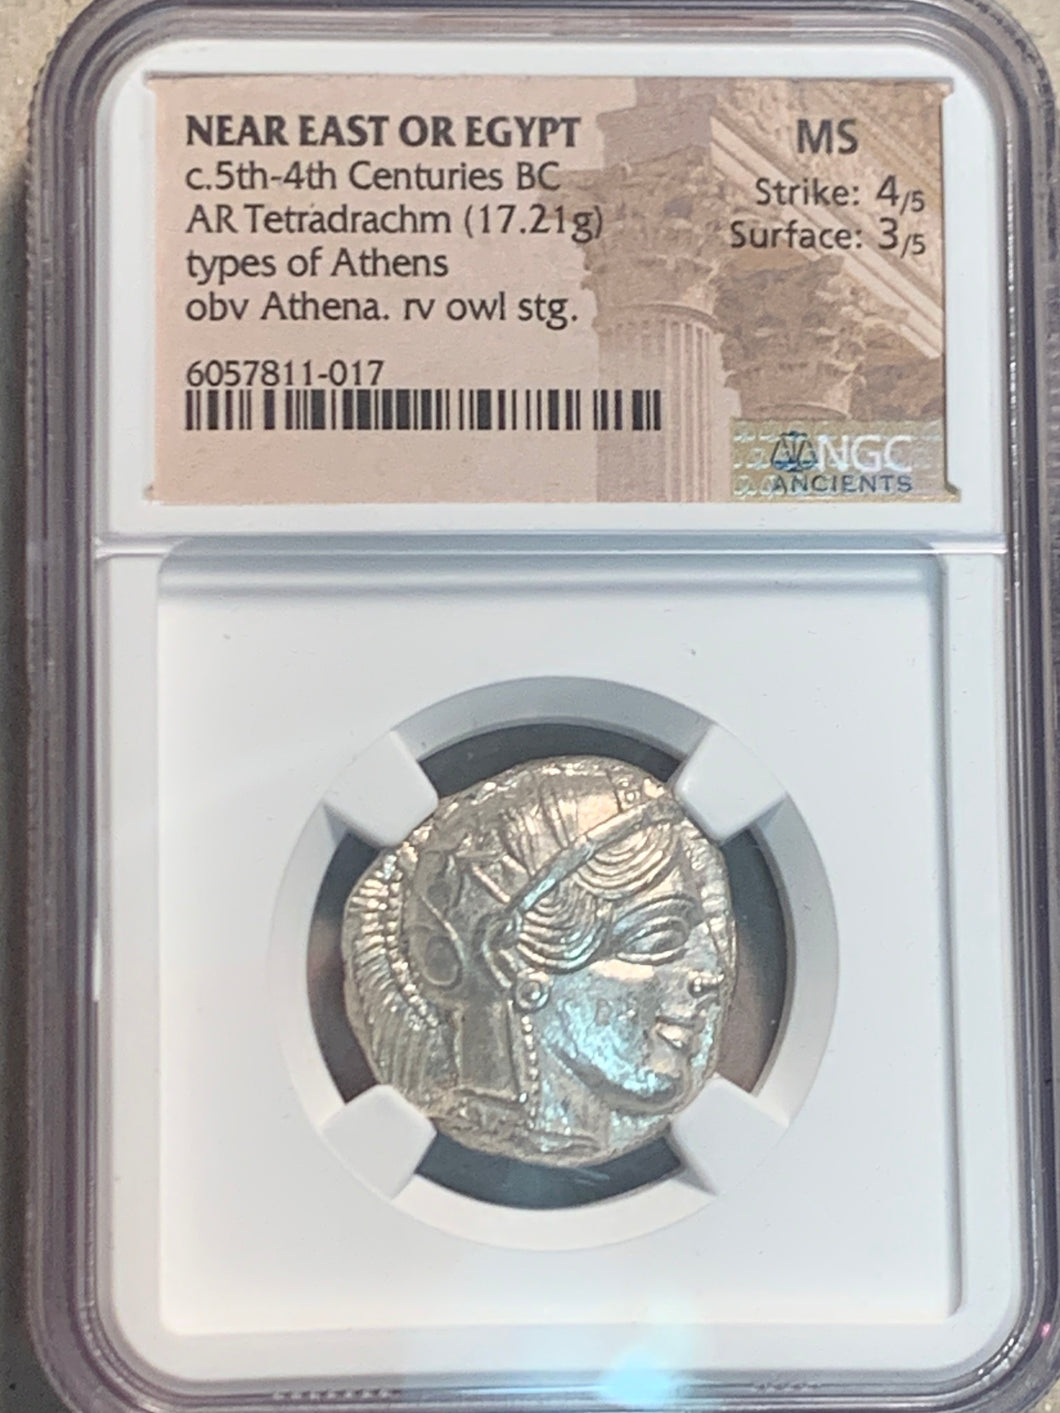 Silver Egyptian Struck Owl, Luster! 5th-4th century BC, Tetrdrachm, NGC Mint State strike 4/5, surface 3/5